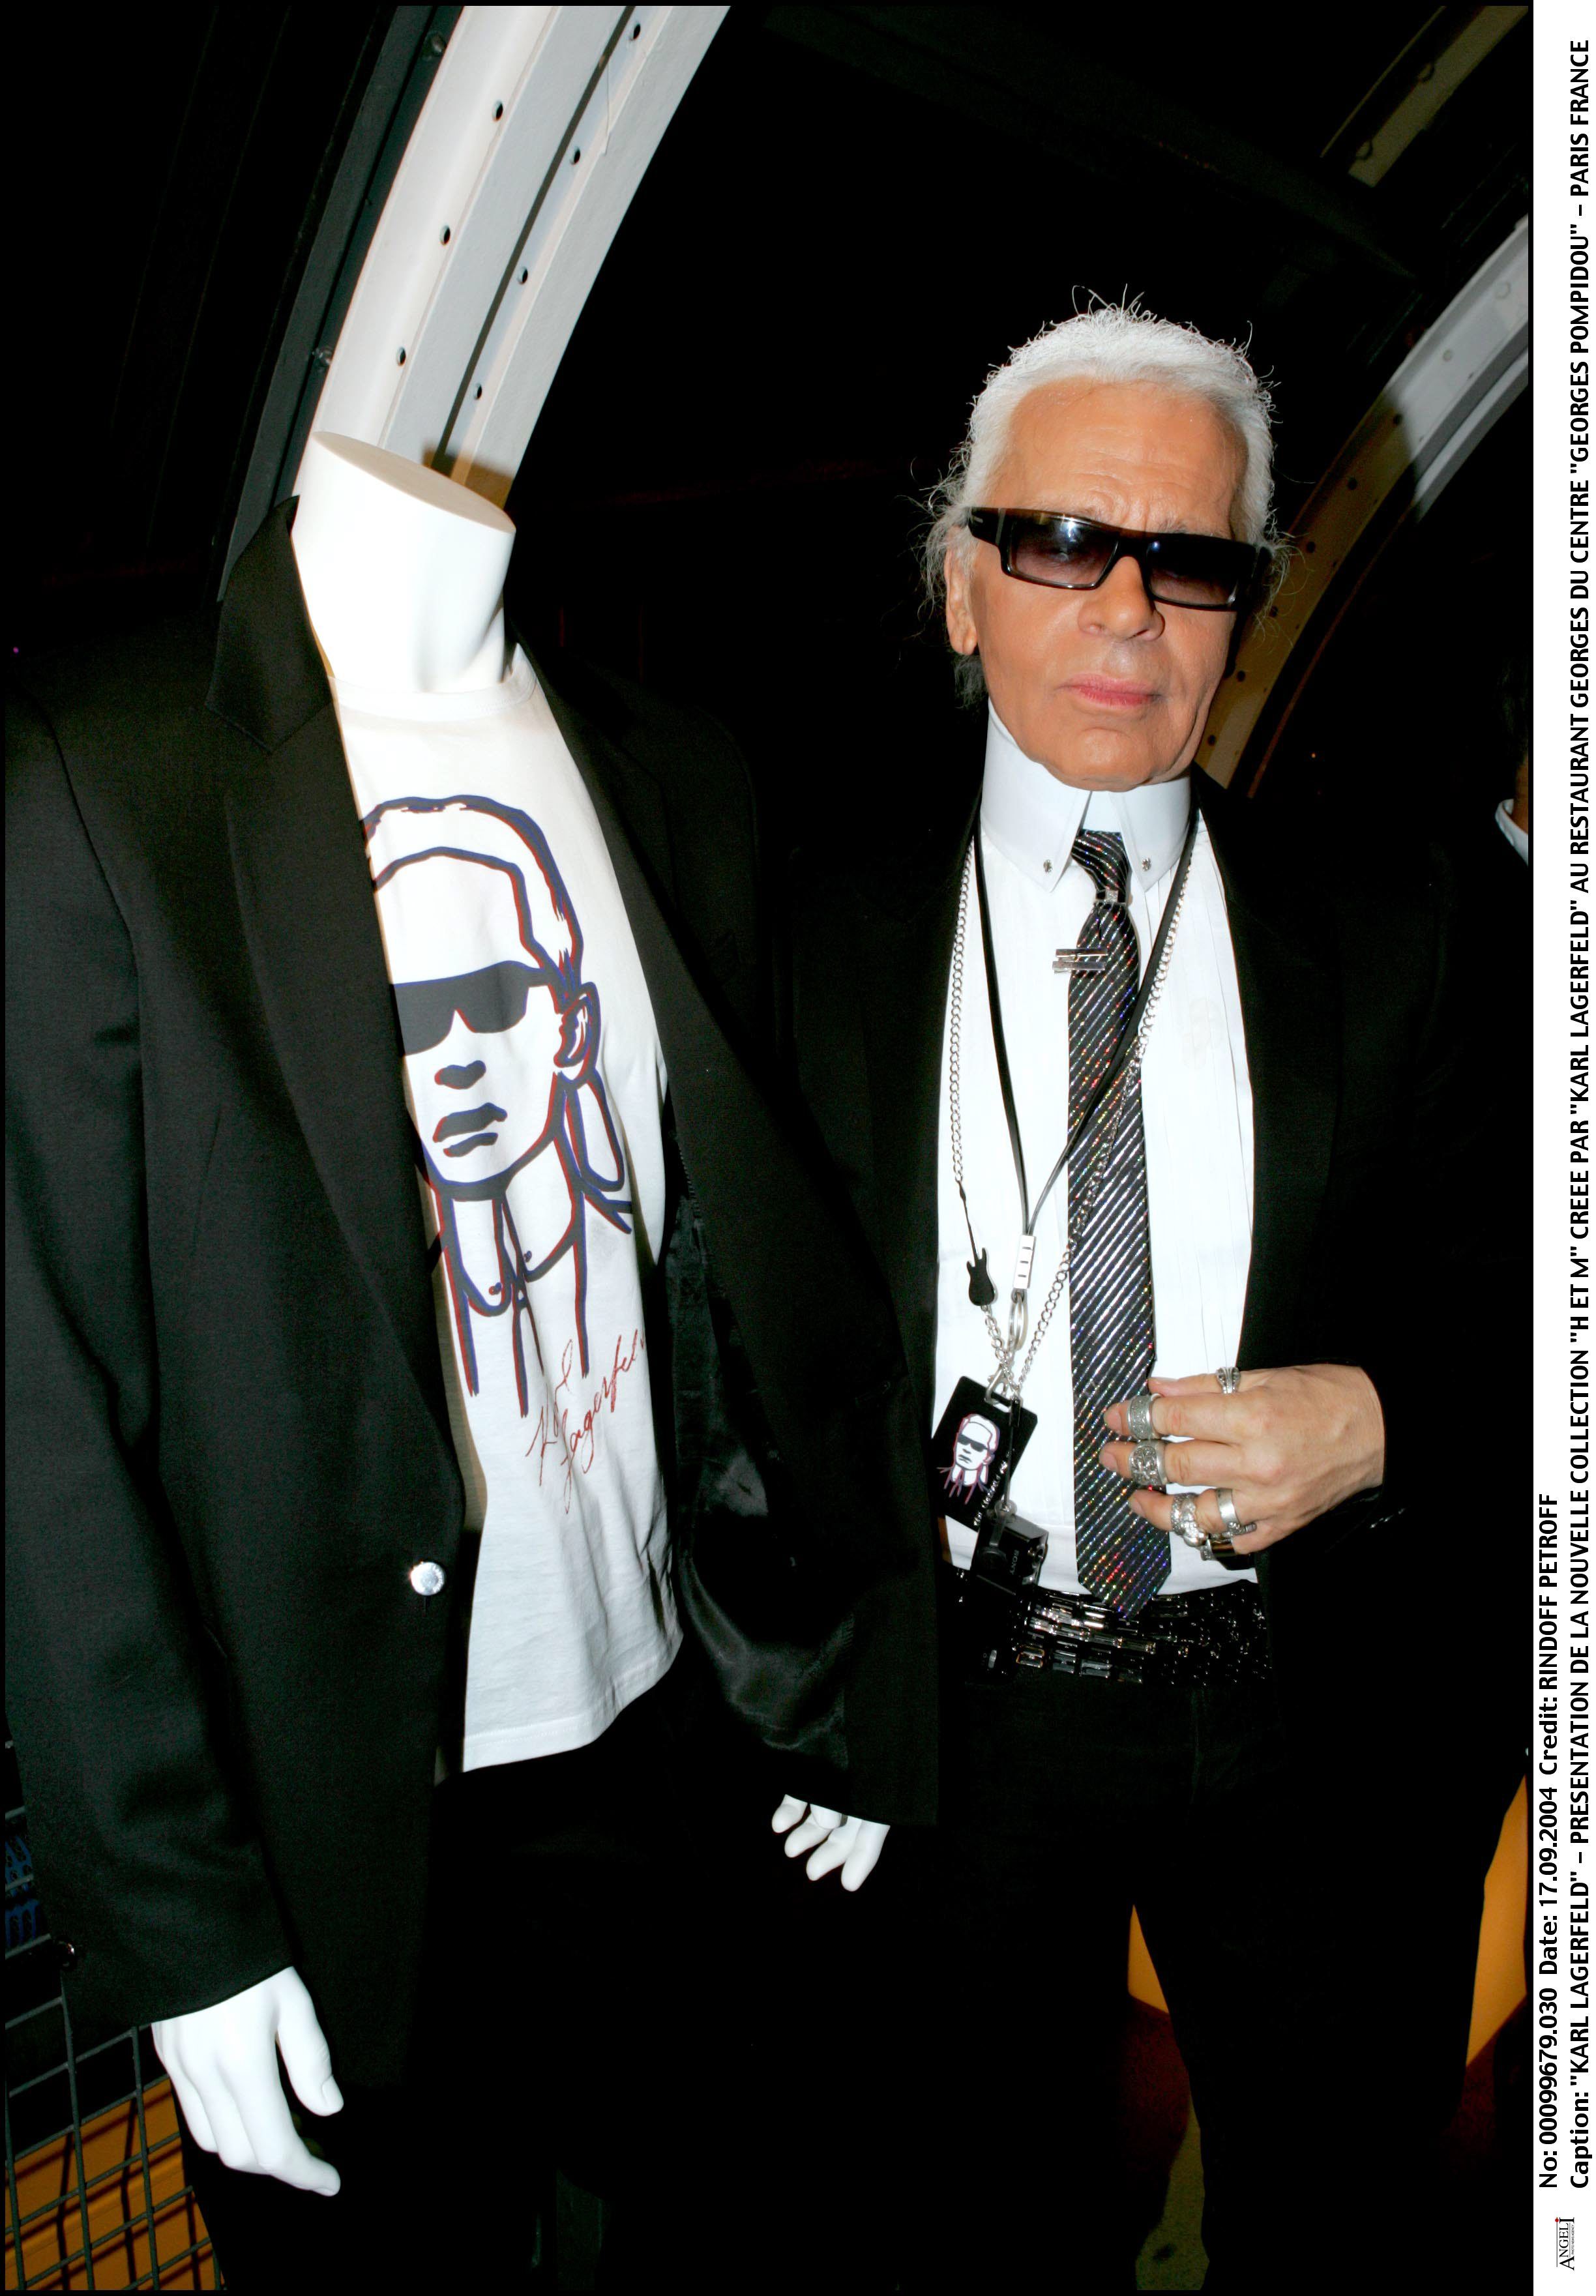 The Karl Lagerfeld Looks That Defined His Career (and Remade Fashion) - The  New York Times